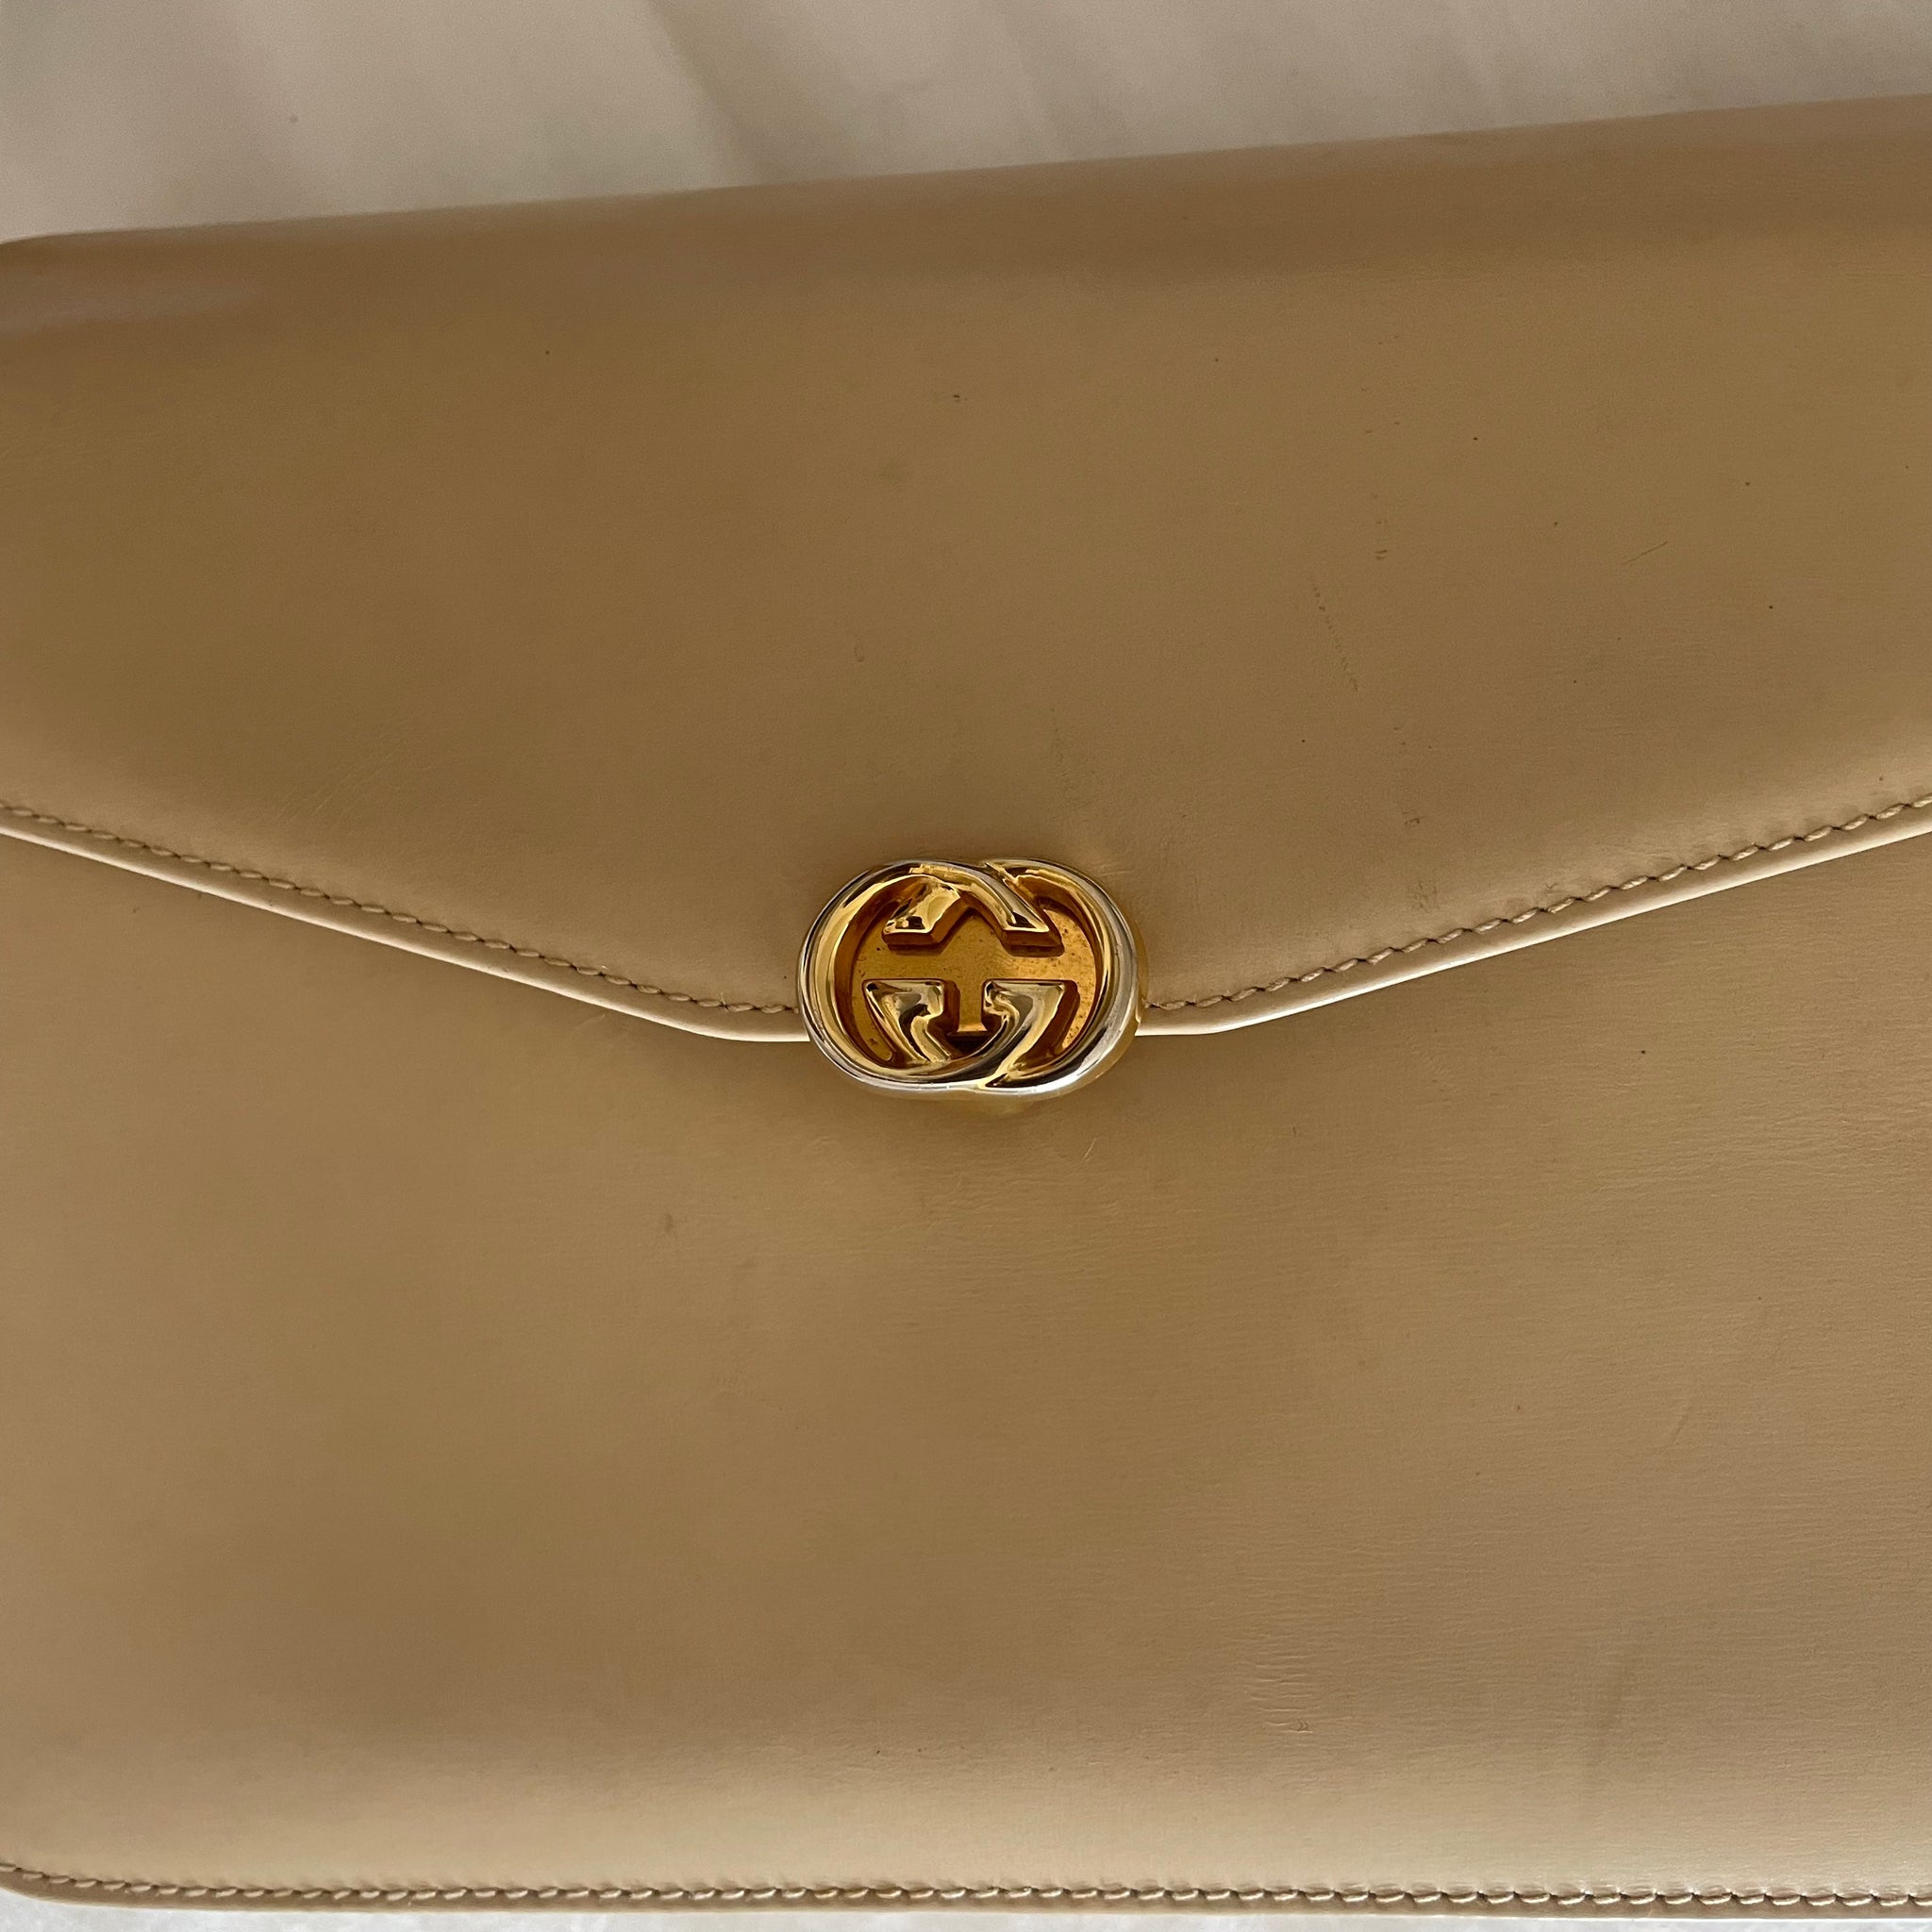 Authentic Gucci Creme Leather Gold GG Shoulder Bag